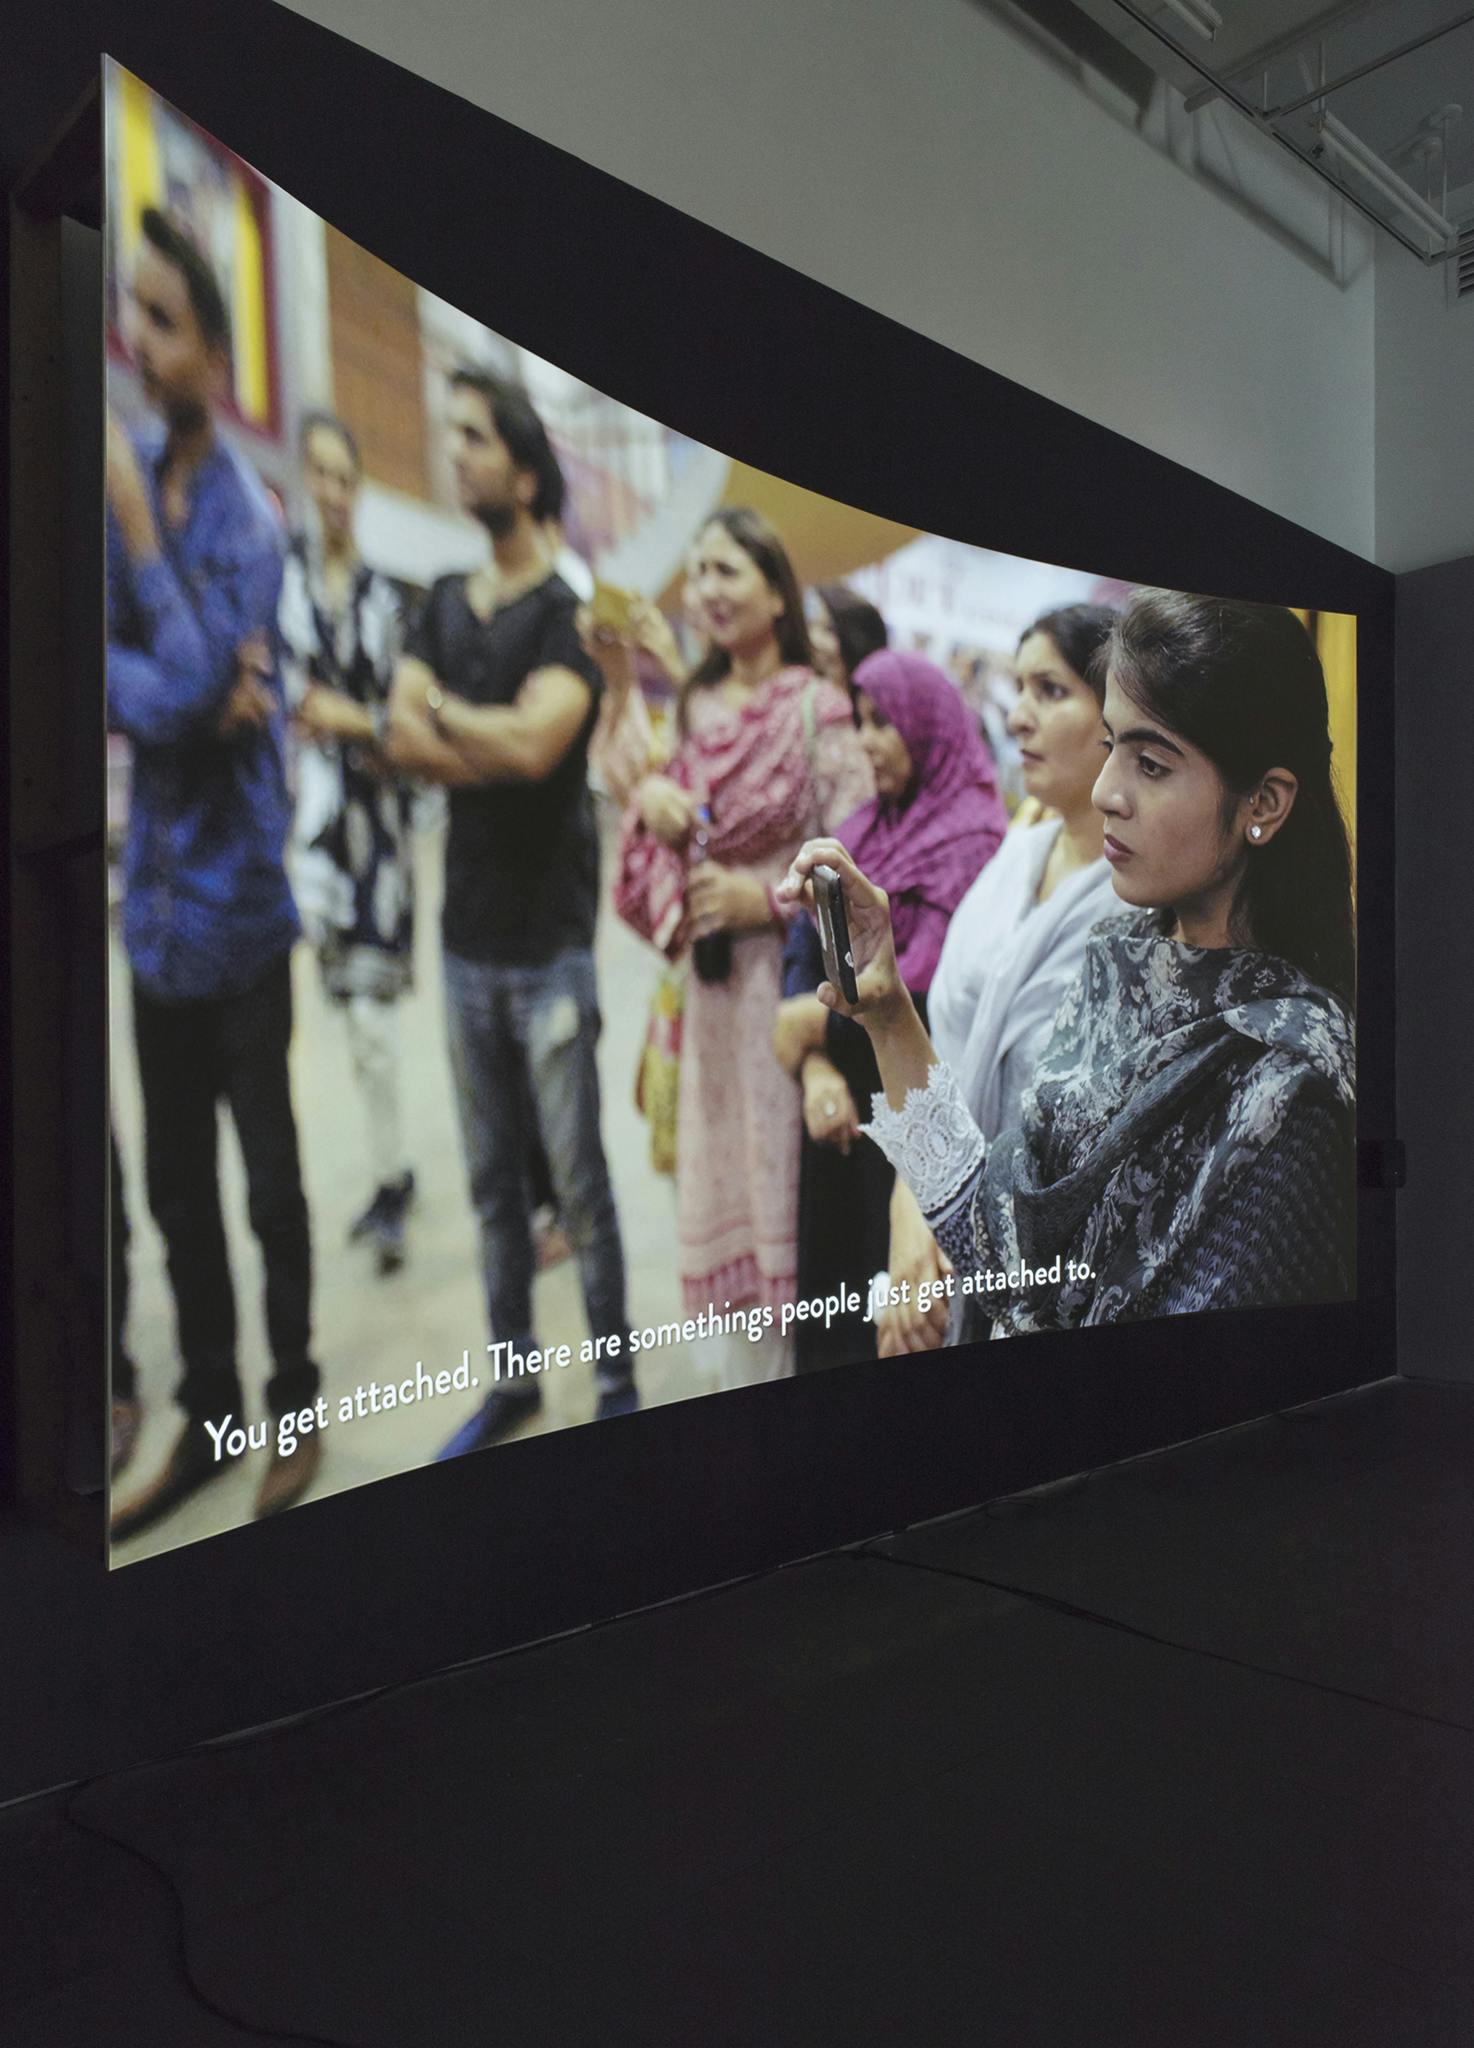 An angled view of a projector screen showing an image of a group of people standing, one is holding a phone. The subtitles read: “You get attached. There are somethings people just get attached to.”